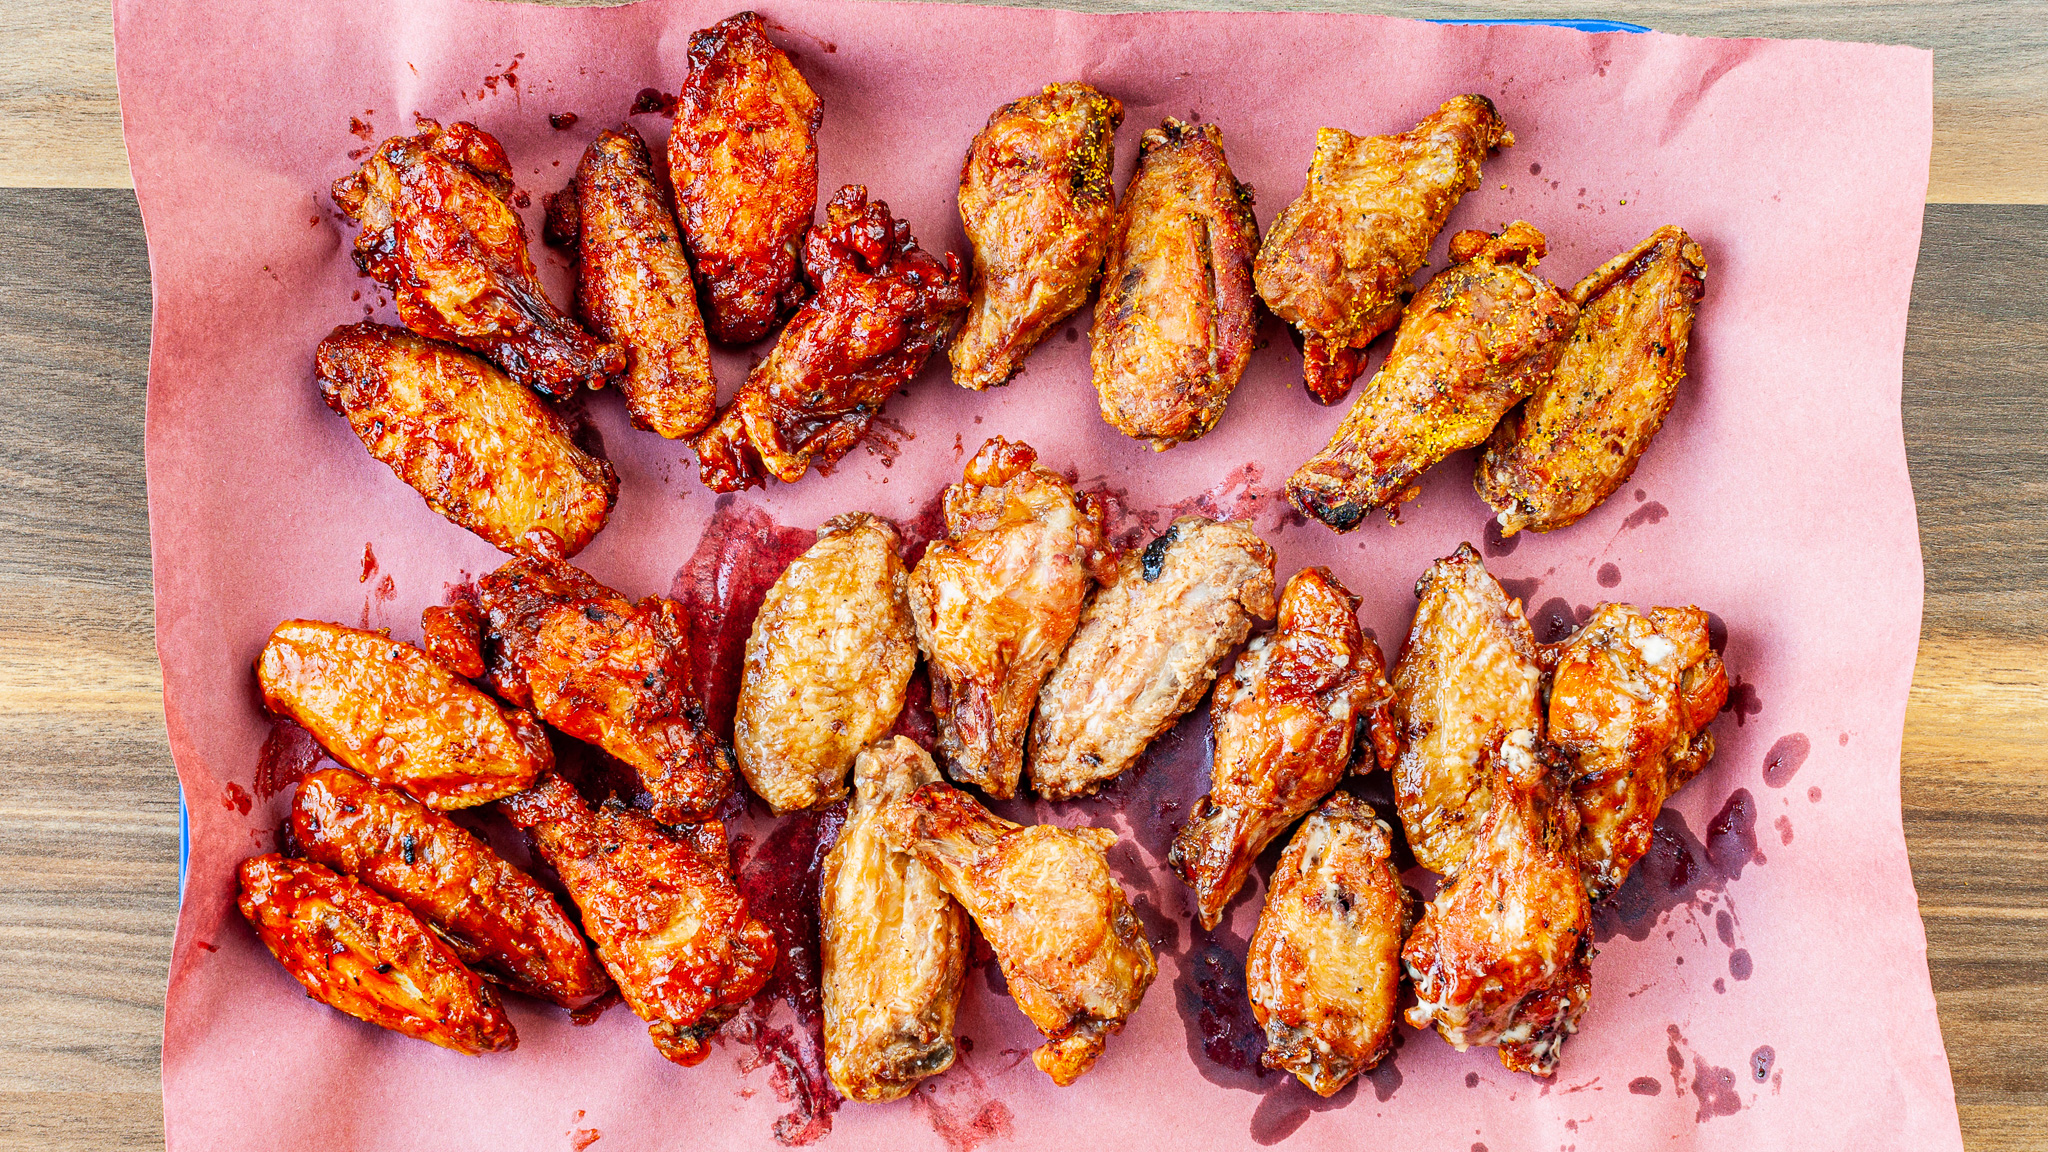 Prairie Dog Brewing's Smoked Chicken Wings - Party size with 25 large, sauced or rubbed Canadian chicken wings, shown on a large BBQ platter.